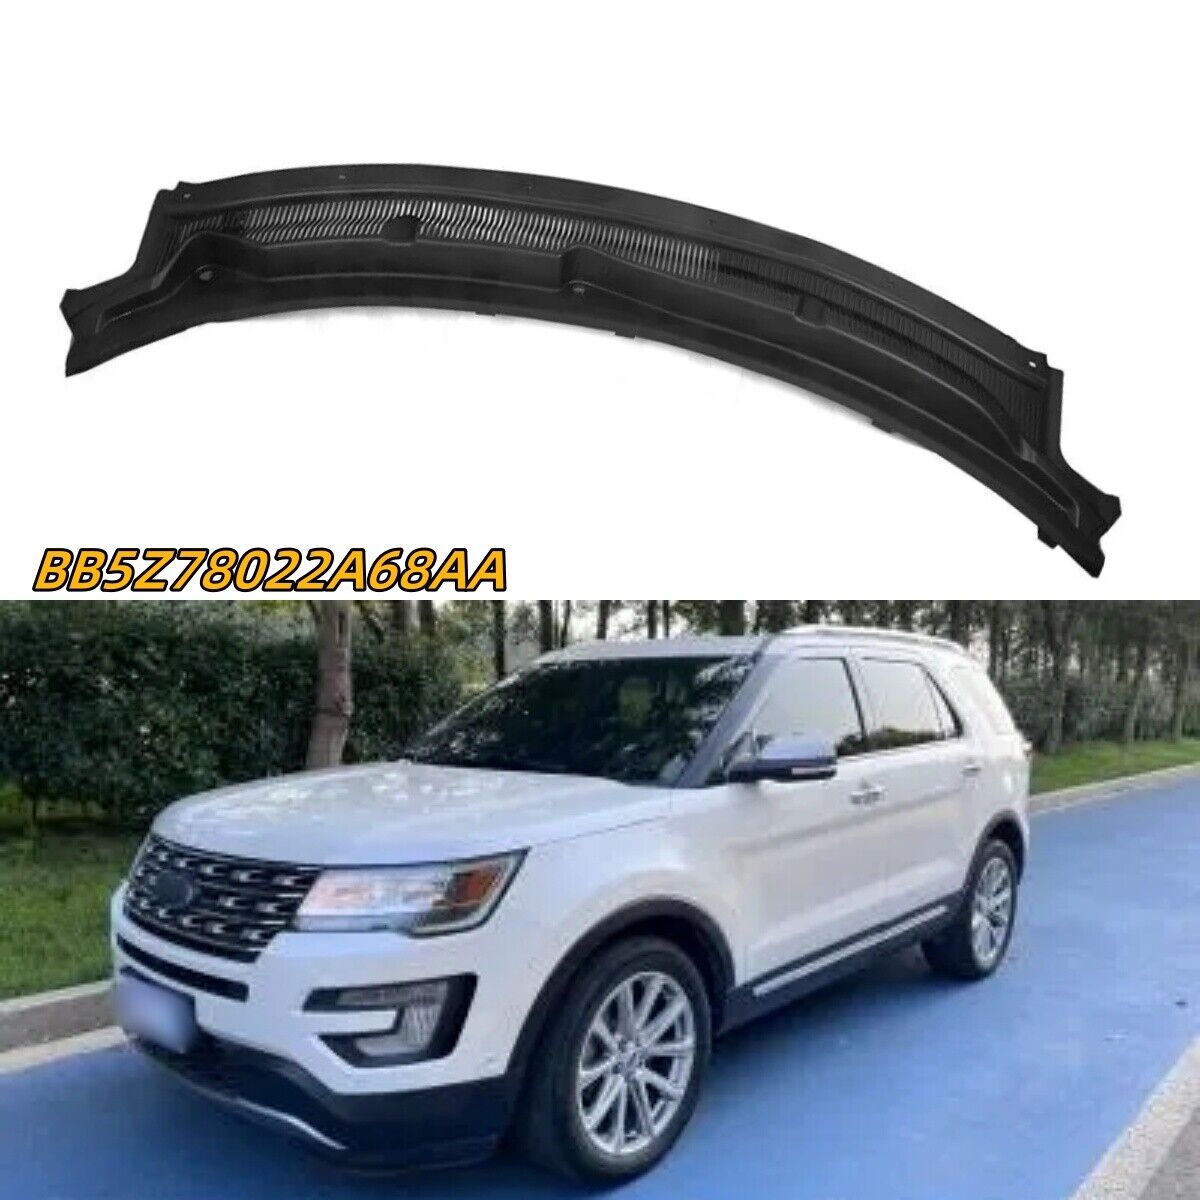 Black Windshield Cowl Grille Top BB5Z78022A68AA Fits For 2011-2019 Explorer US